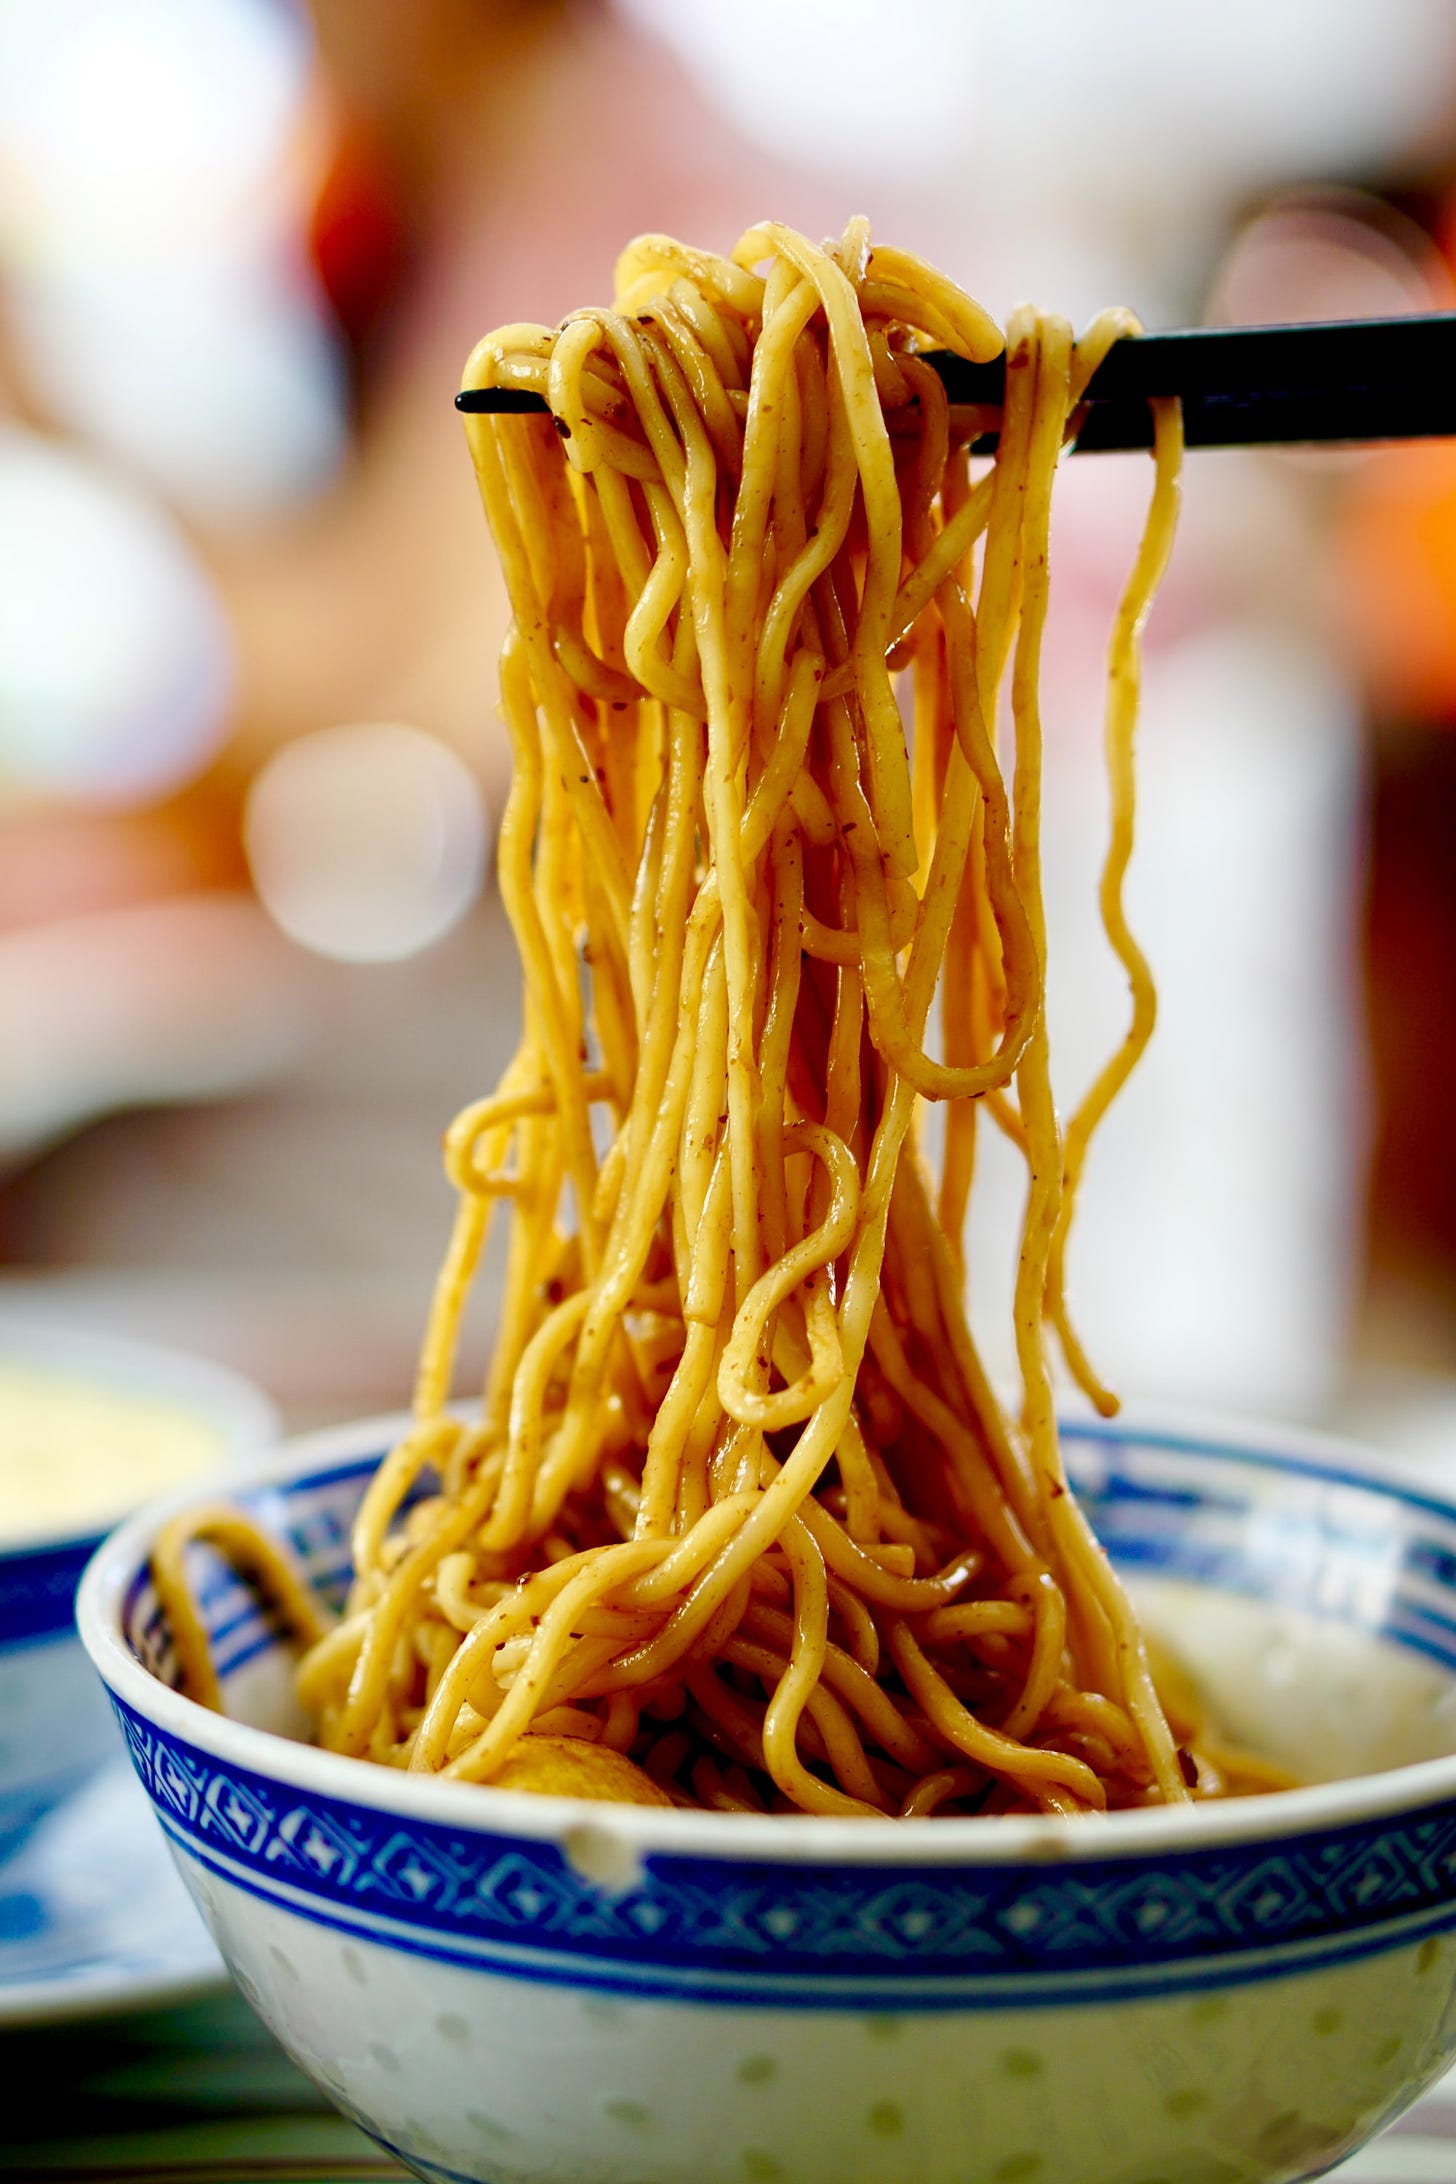 Noodle Theory Part 1: The Illusion of Skill